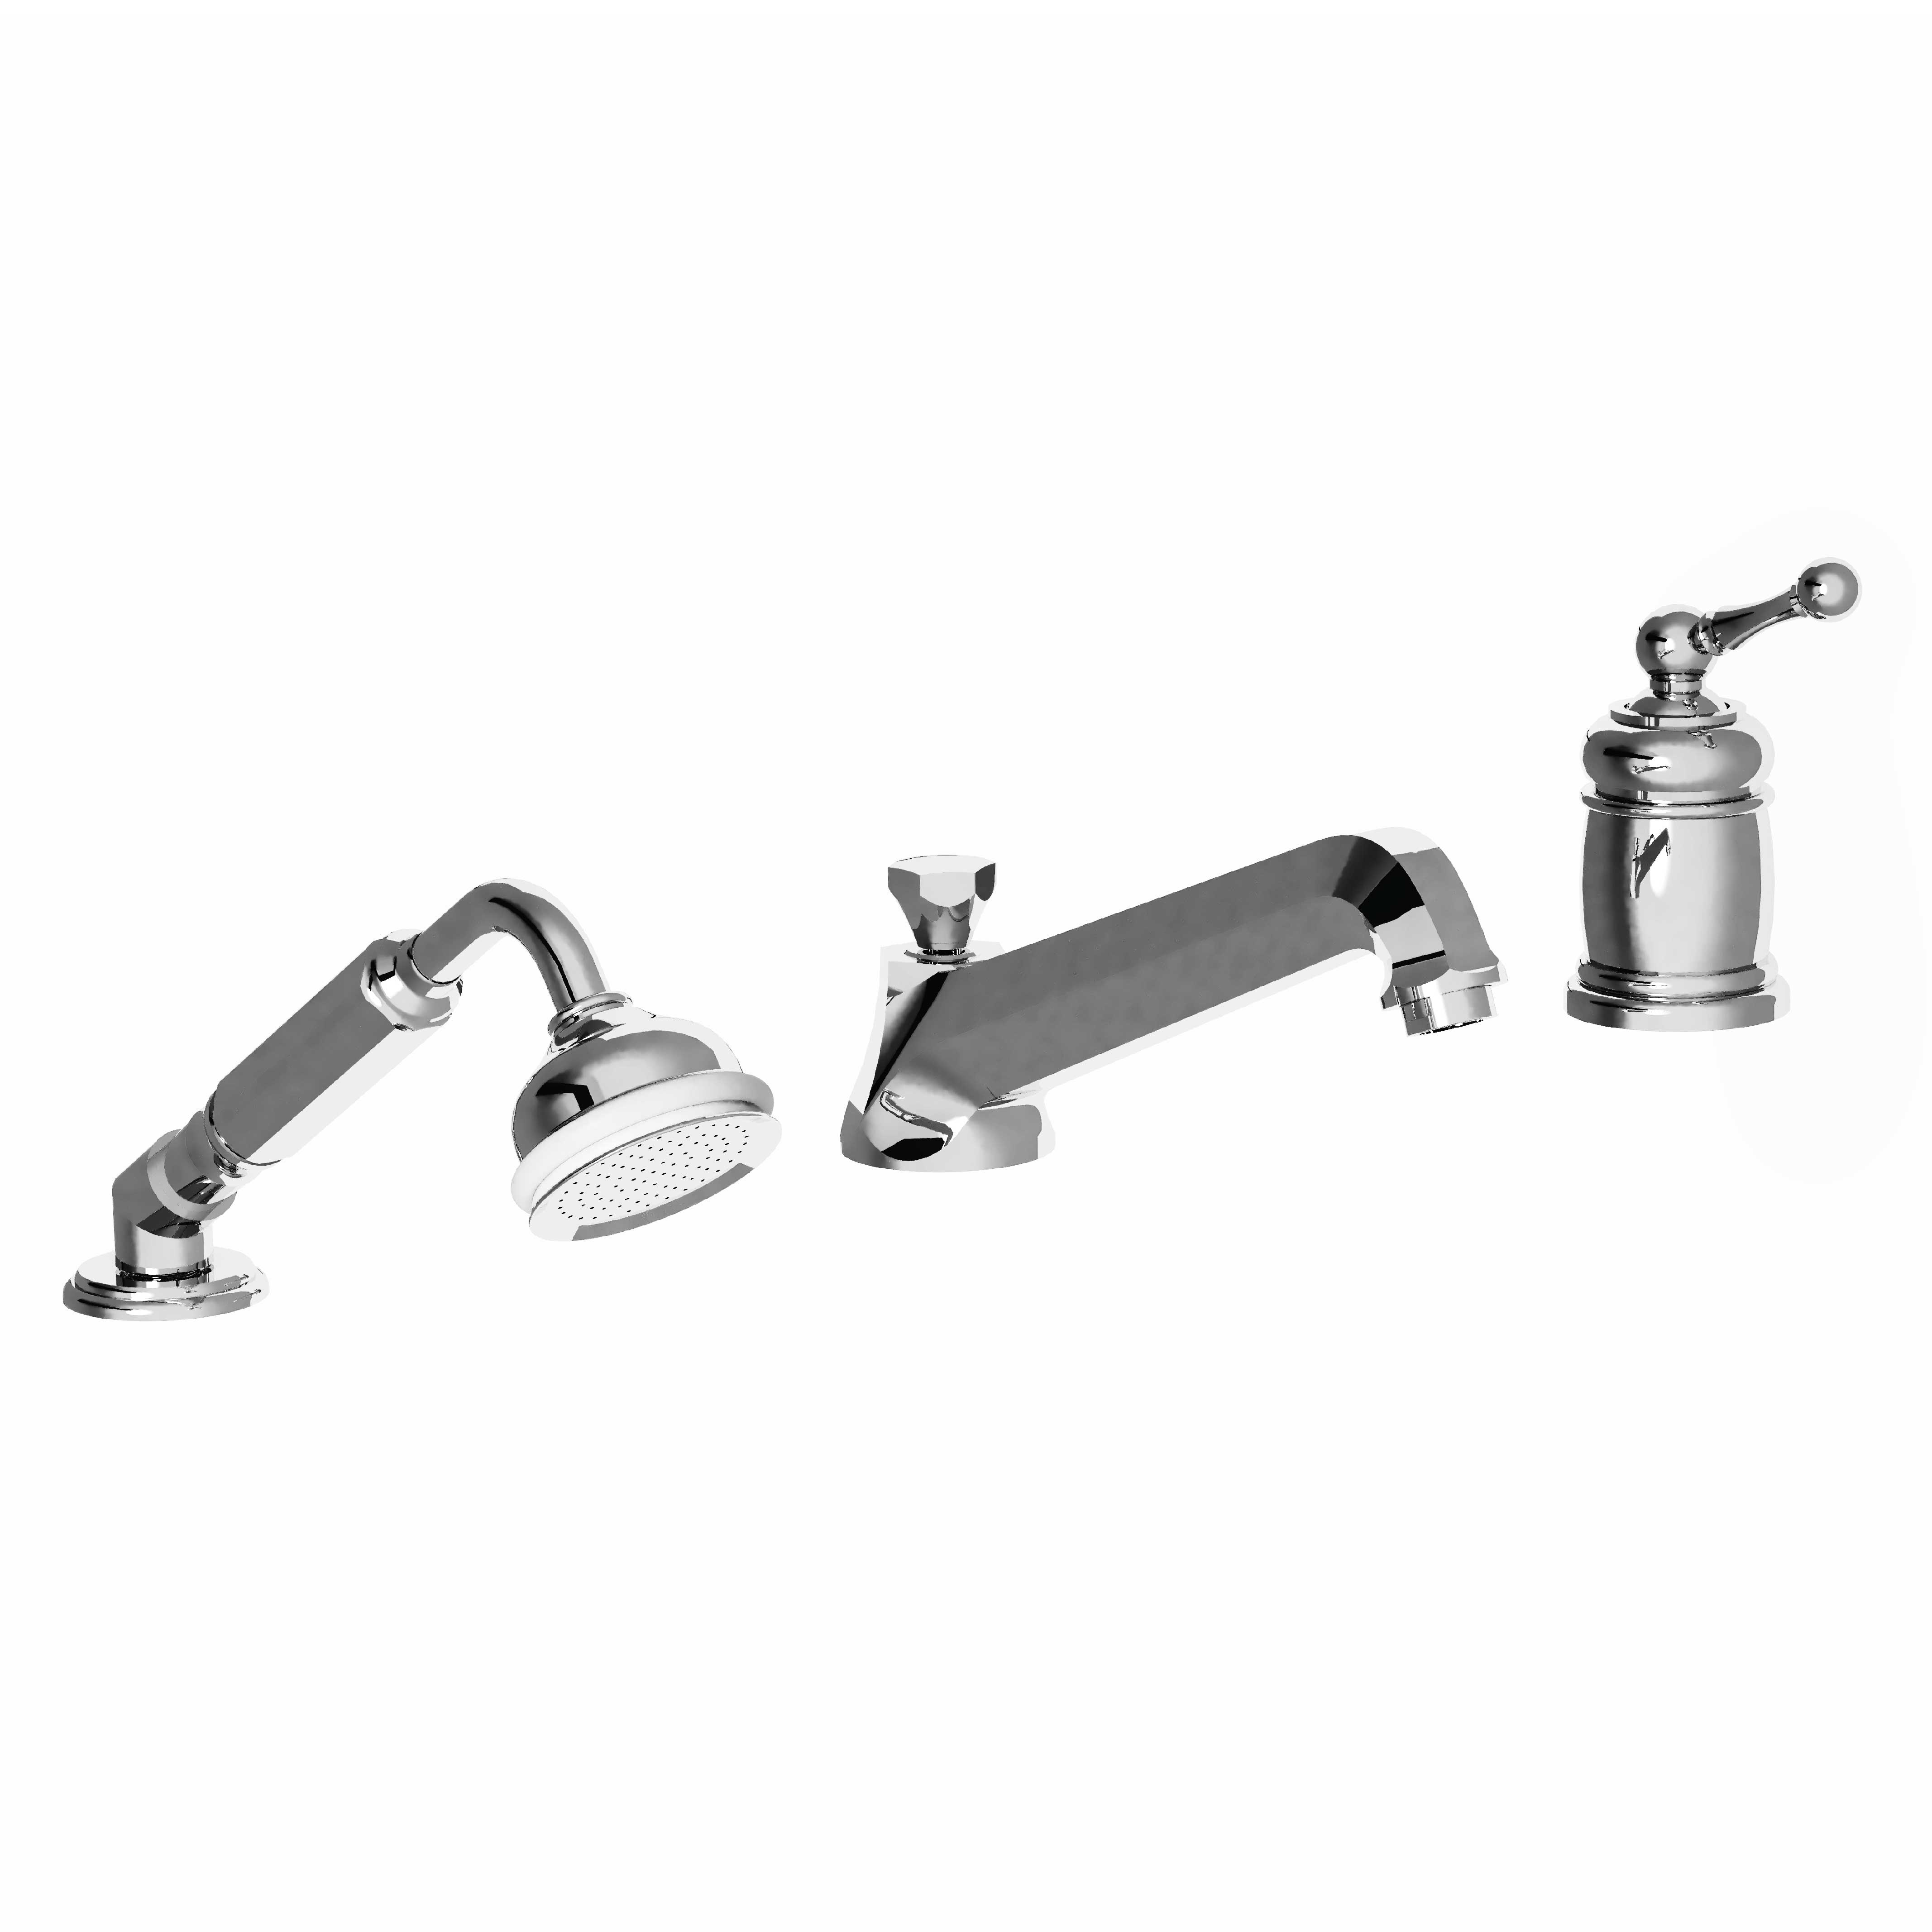 M30-3301M 3-hole single-lever bath and shower mixer